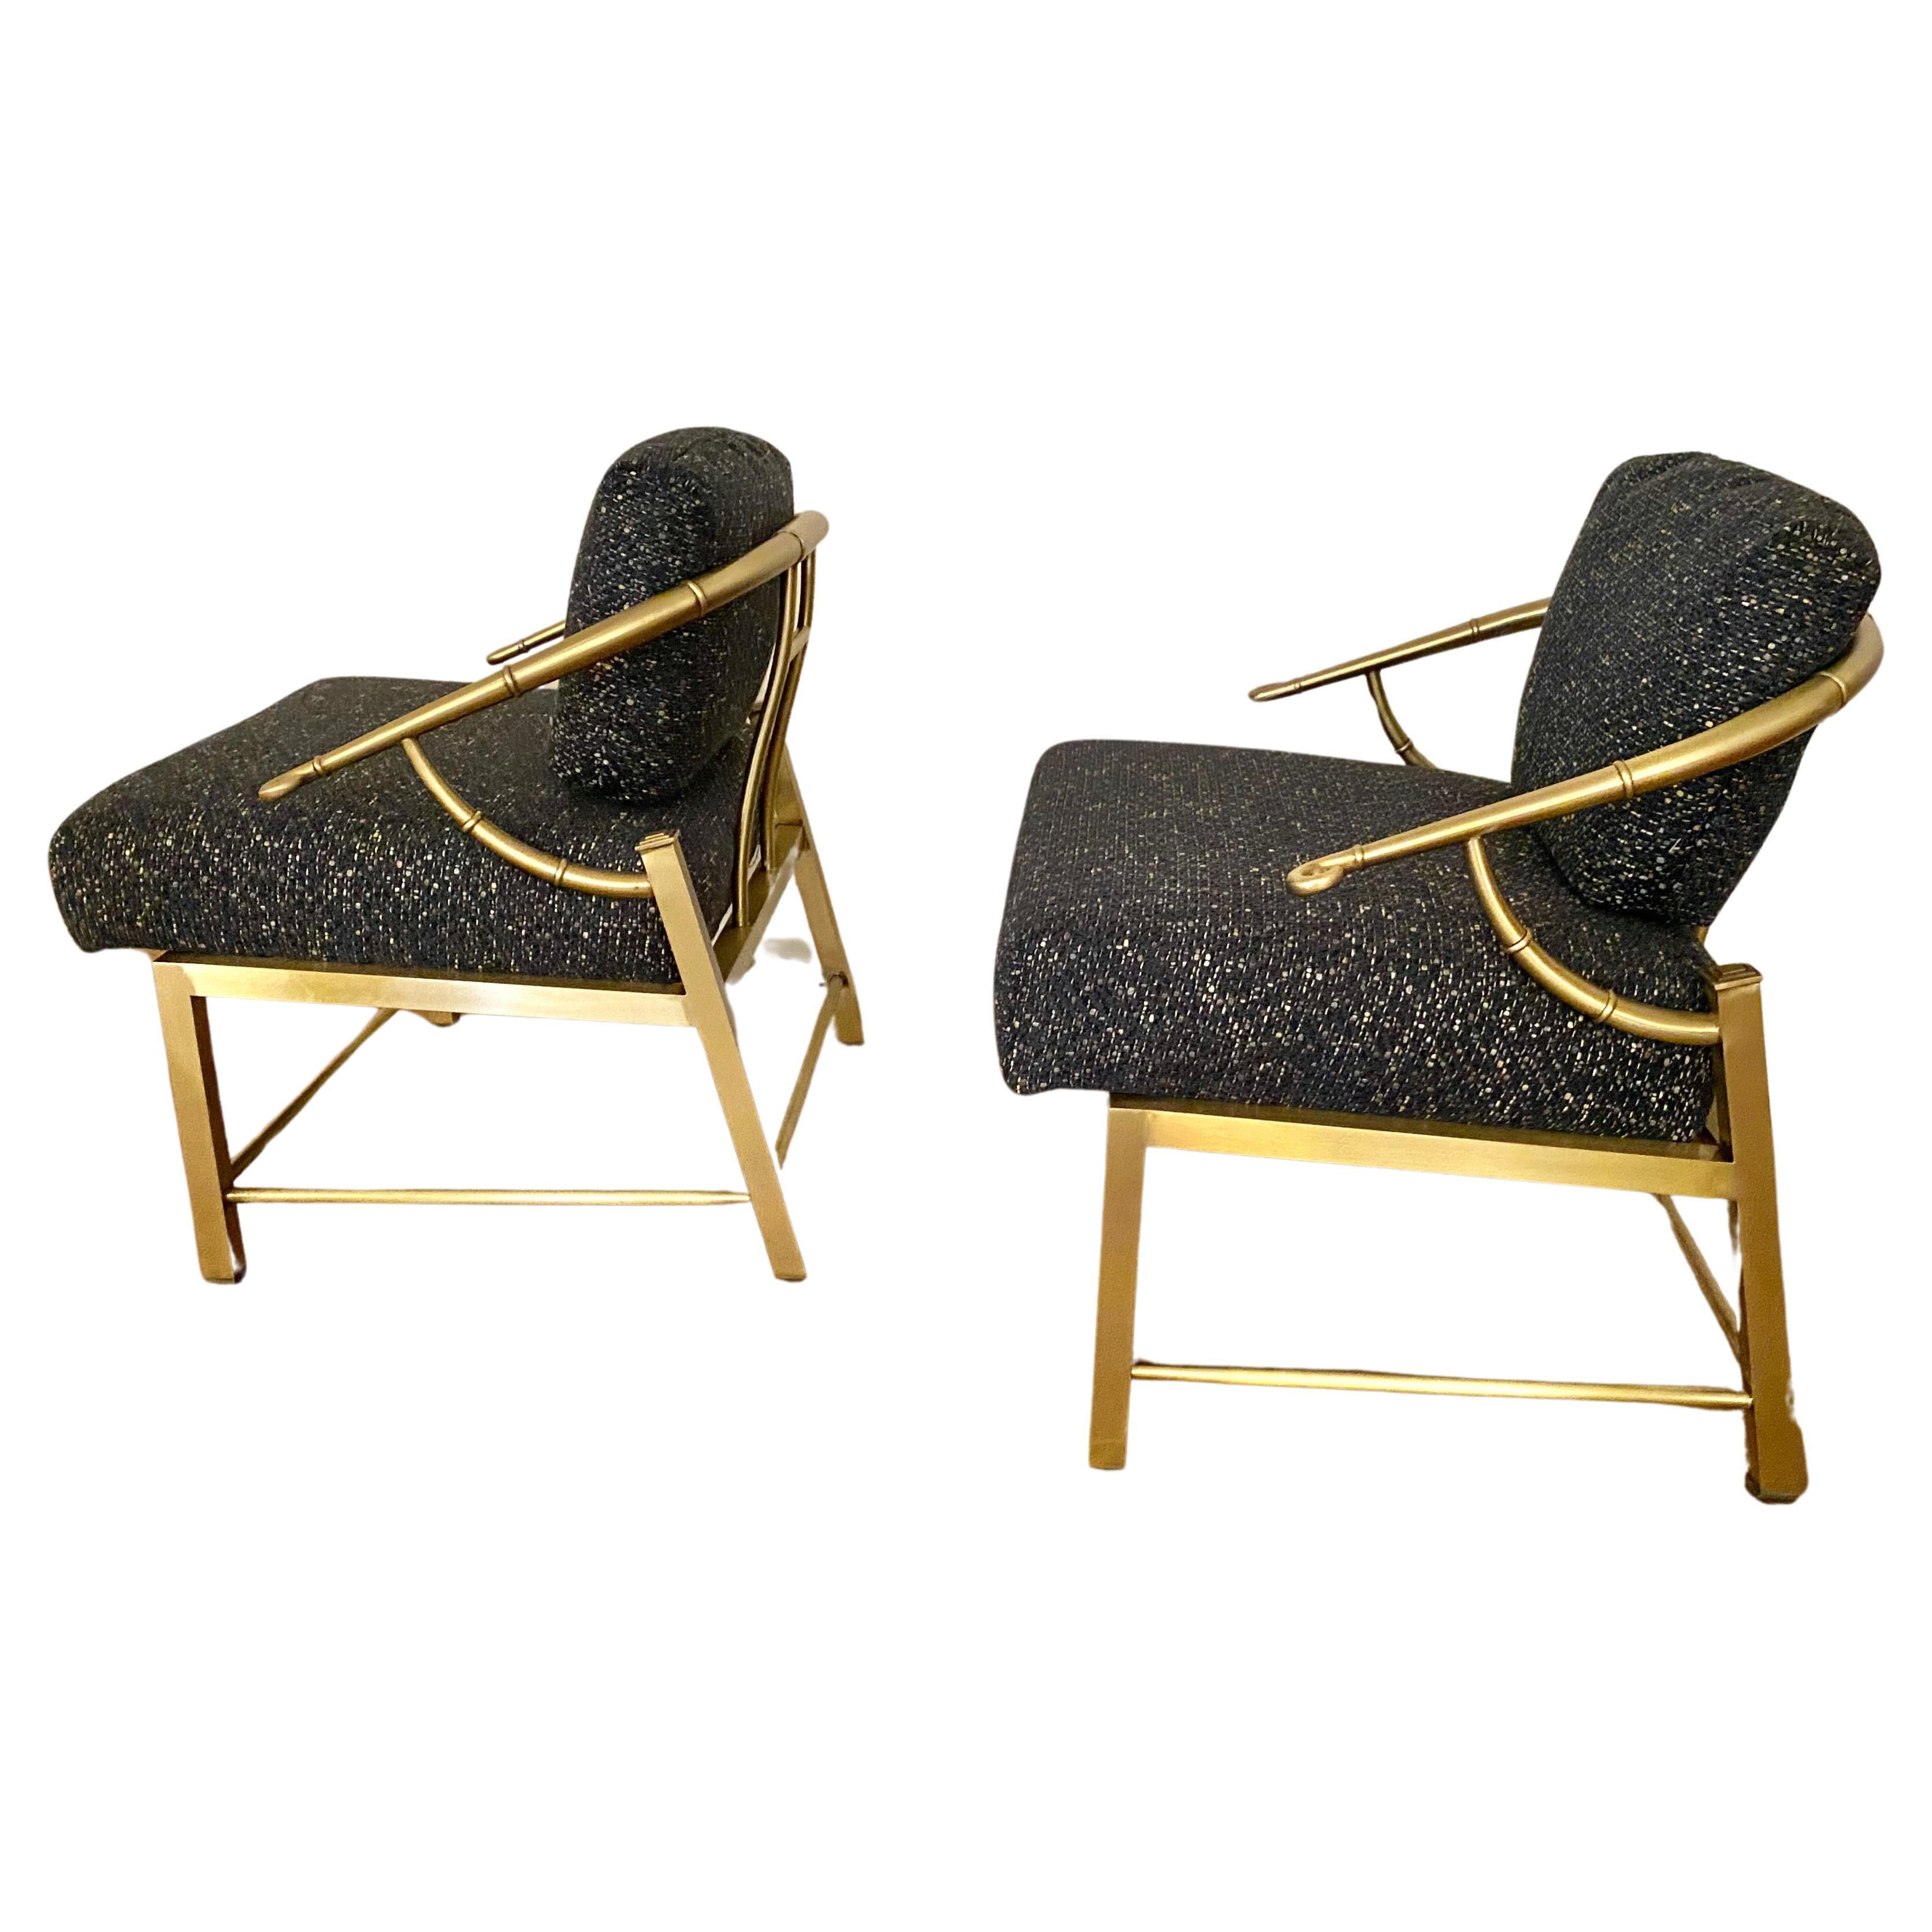 This is a pair of iconic Mastercraft brass Chinese style horseshoe chairs that date to the c. 1970-1980. Both chairs are in excellent condition--their frames have been polished and they are newly upholstered in a hand woven fabric. Both chairs are